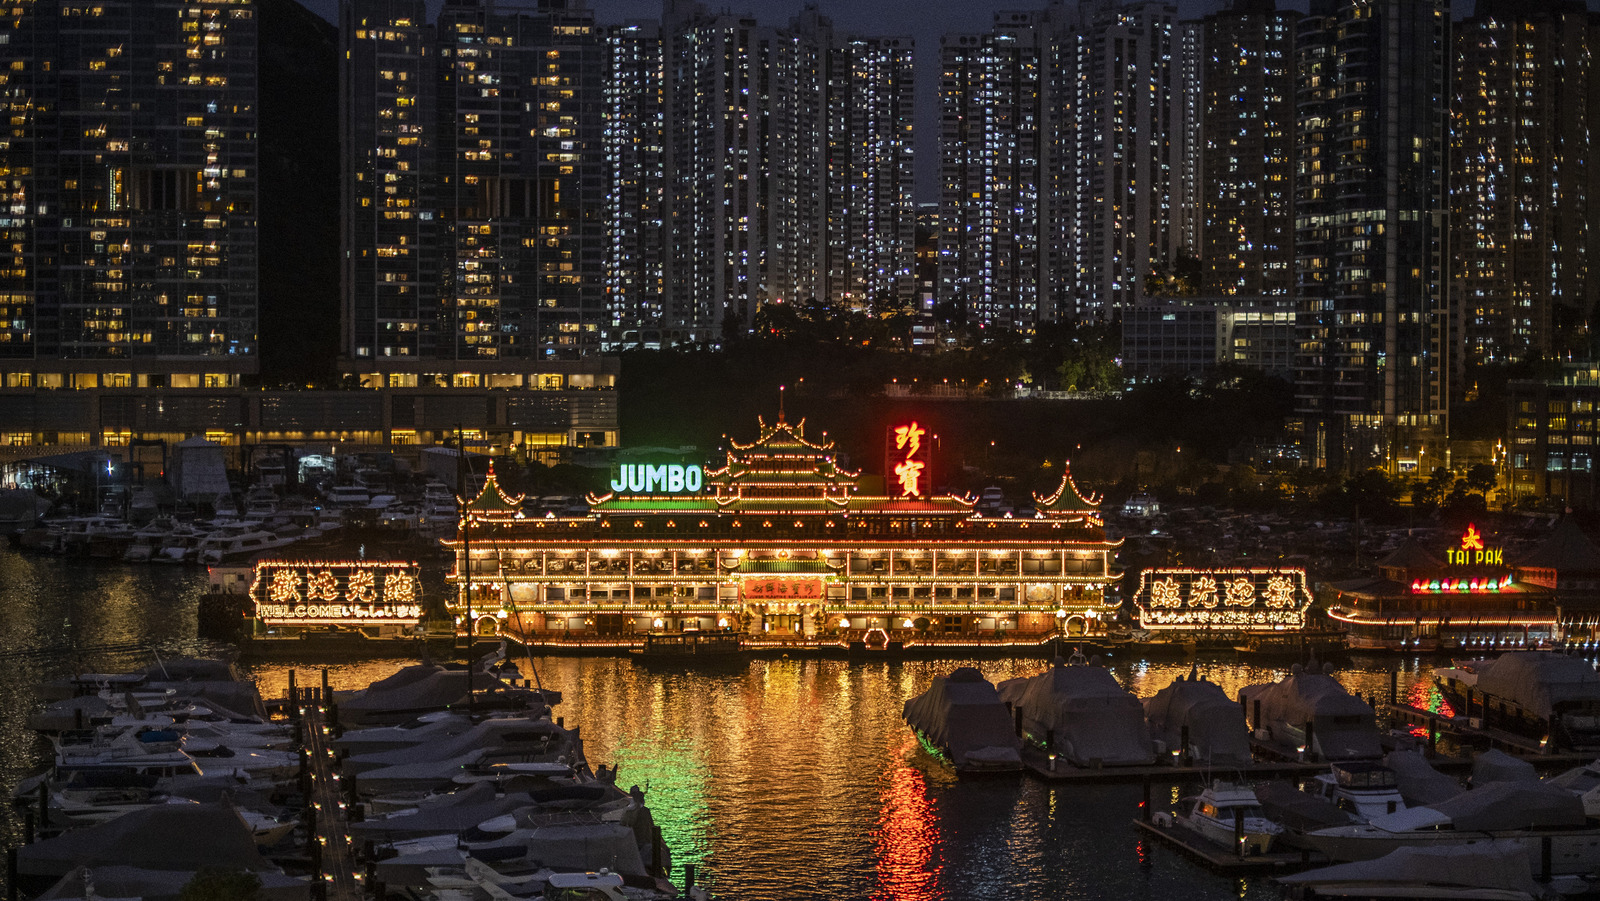 The iconic Hong Kong restaurant that is the latest victim of COVID-19